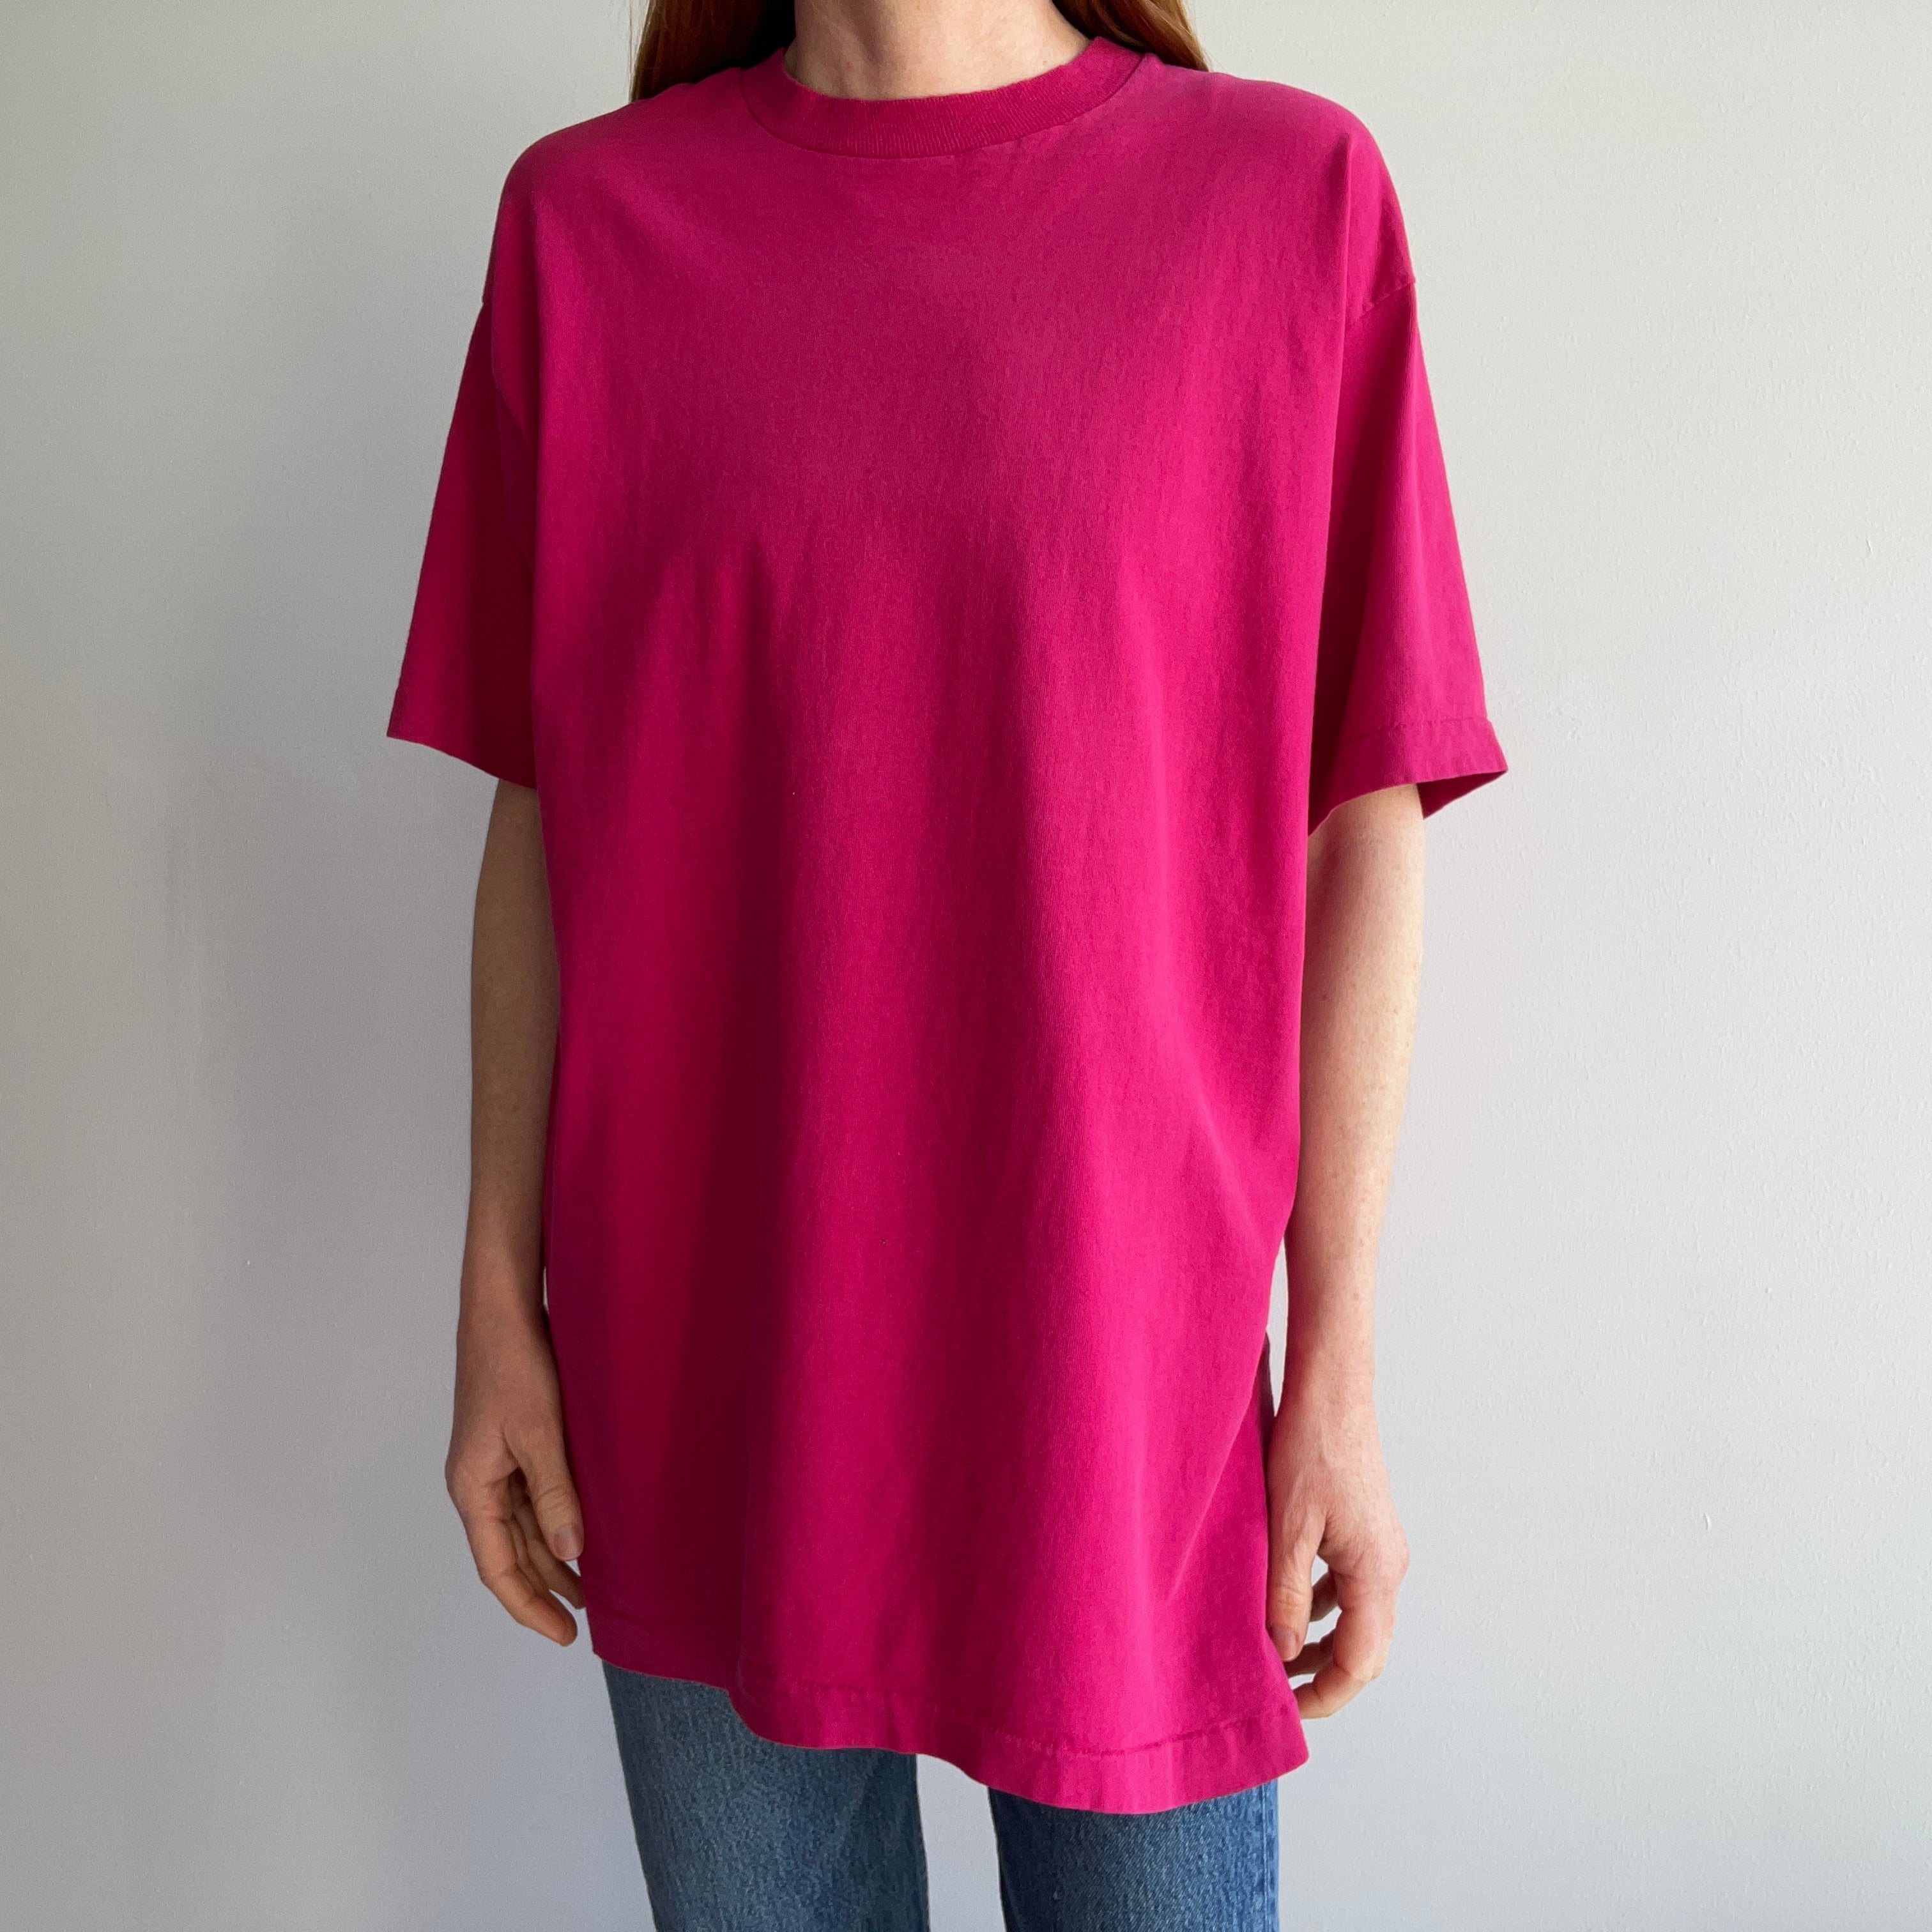 1980s Barbie Pink FOTL Cotton T-shirt with Collar Tattering - YES